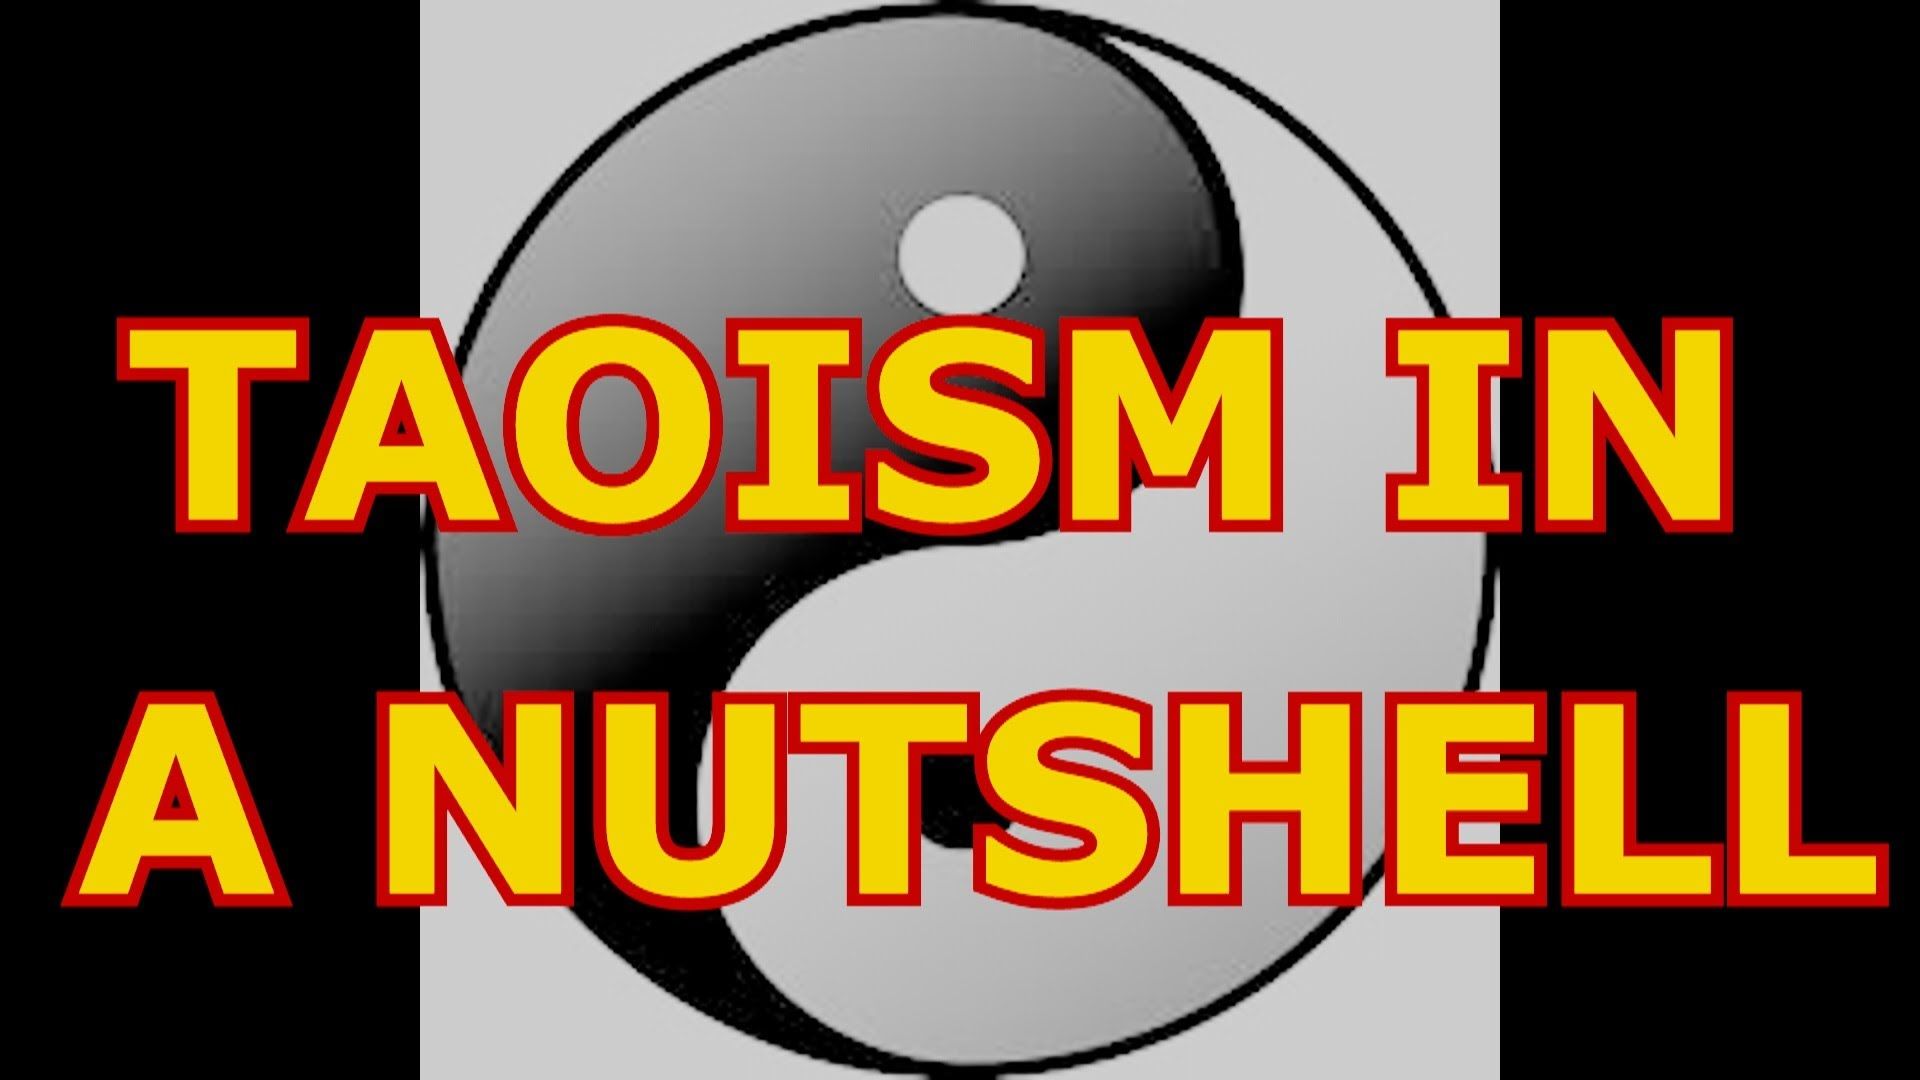 Taoism In A Nutshell Taoism 101 Taoism Explained What Is Taosim ...